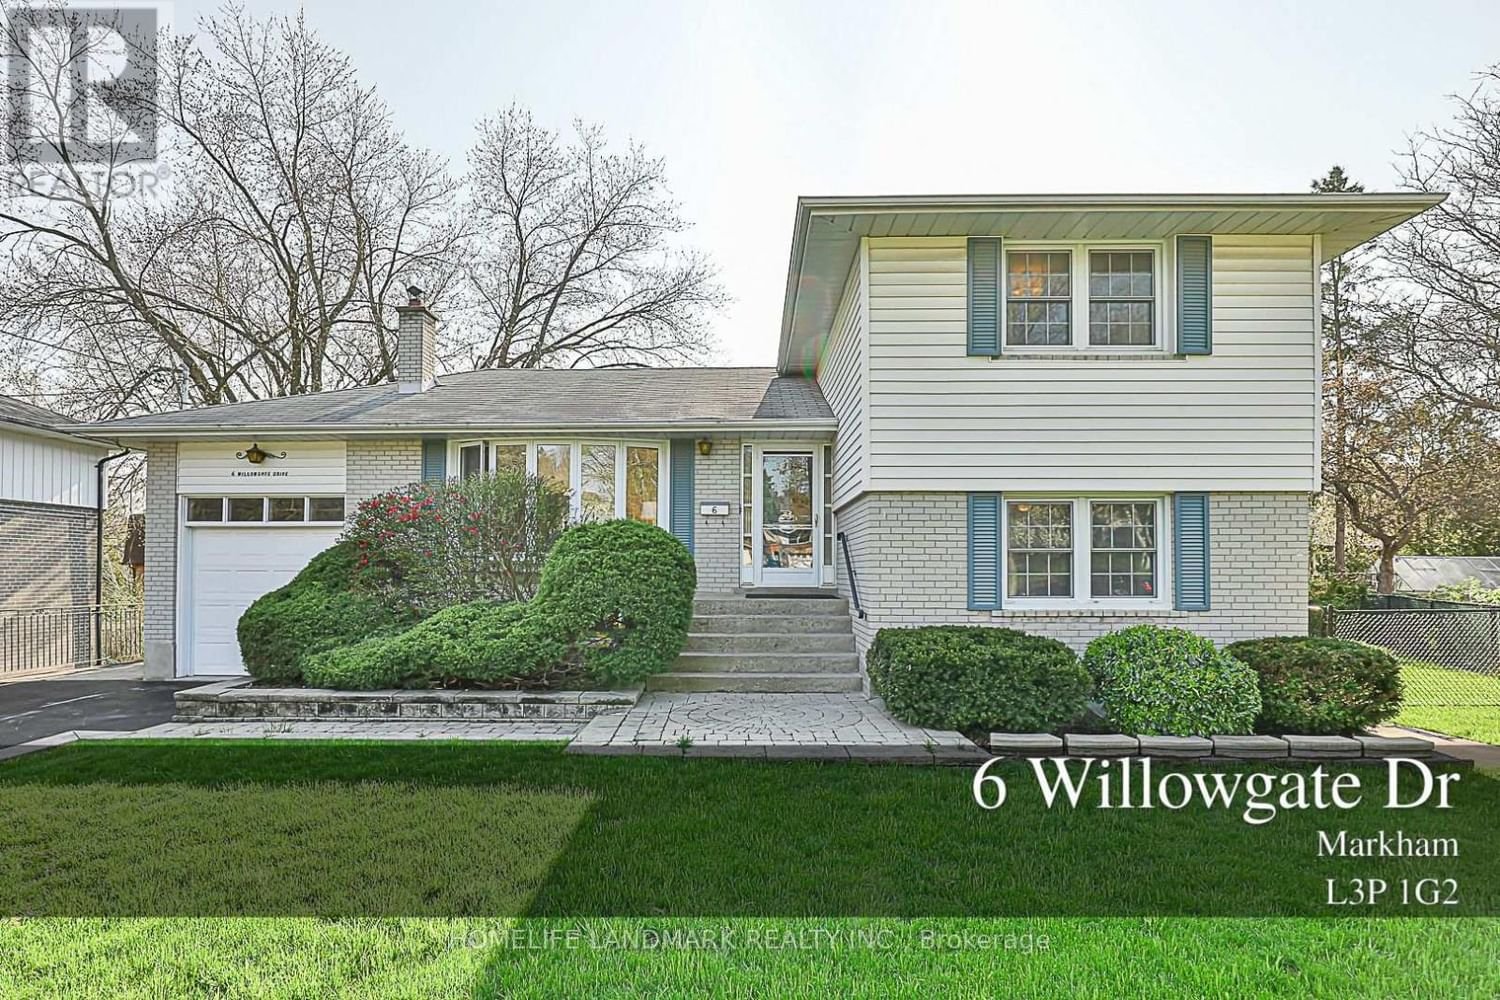 6 WILLOWGATE DRIVE Image 1